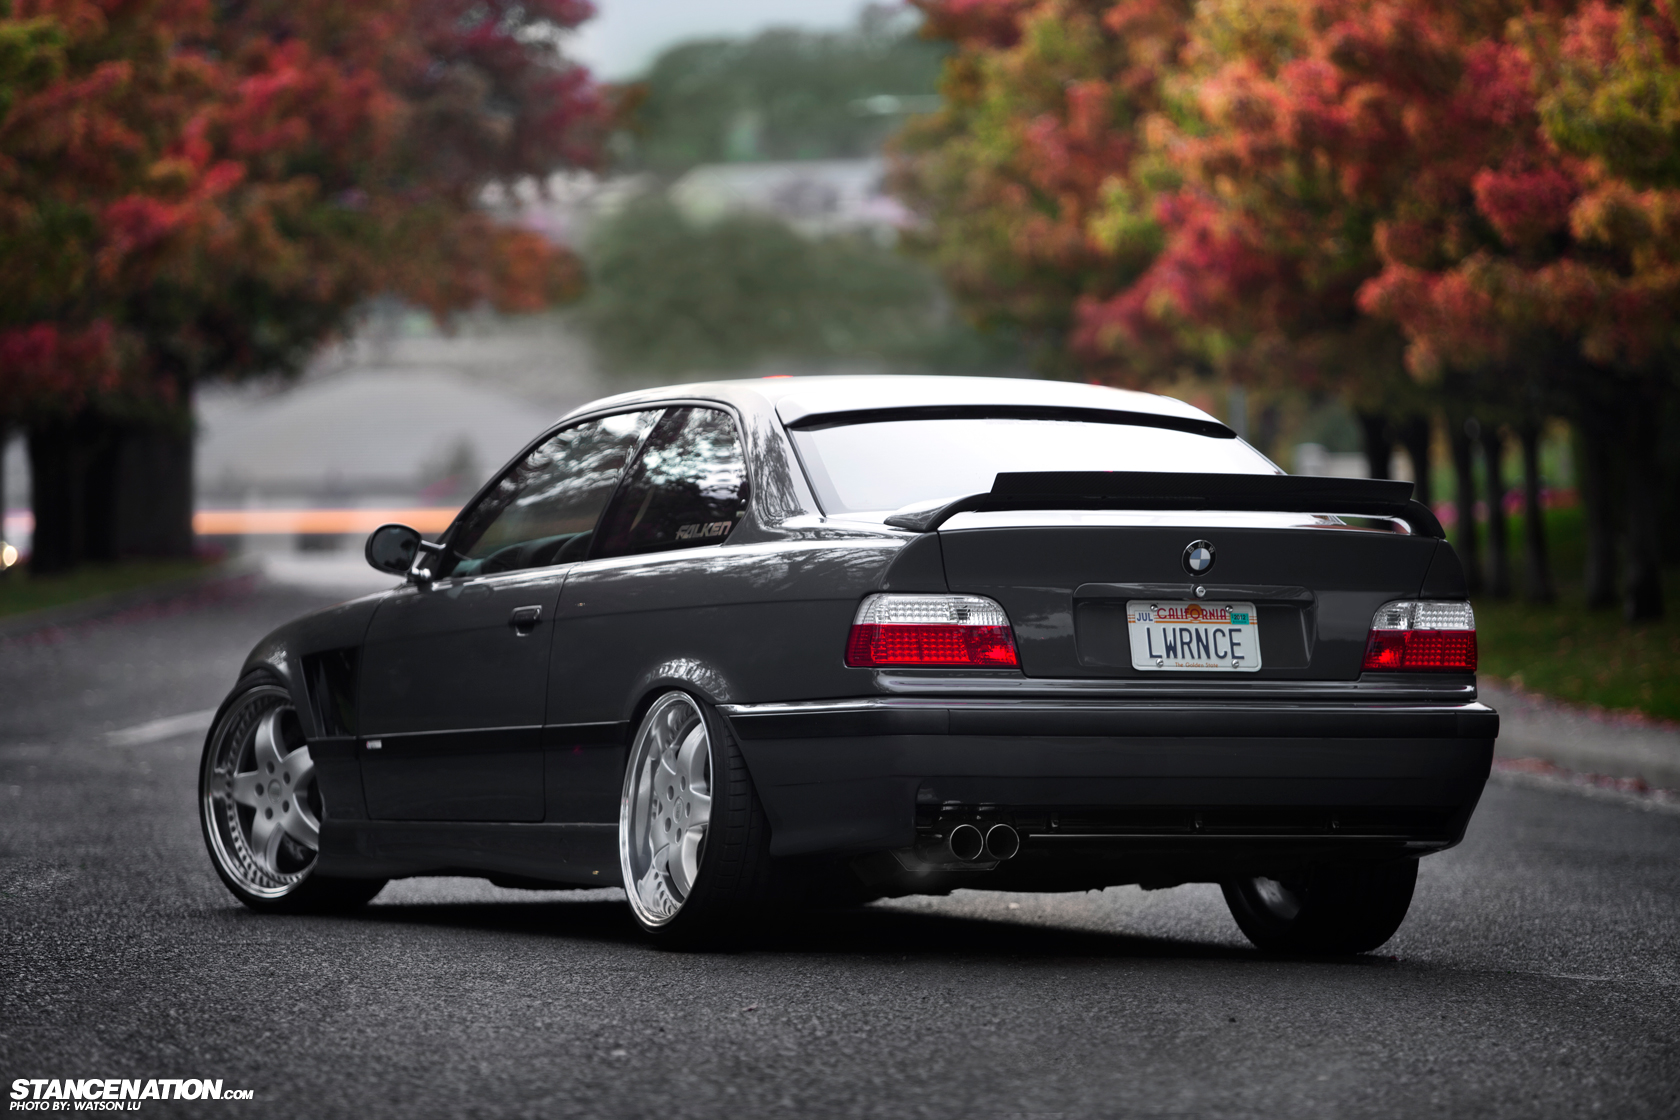 More than Meets the Eye // Lawrence's Beautiful BMW E36. | StanceNation